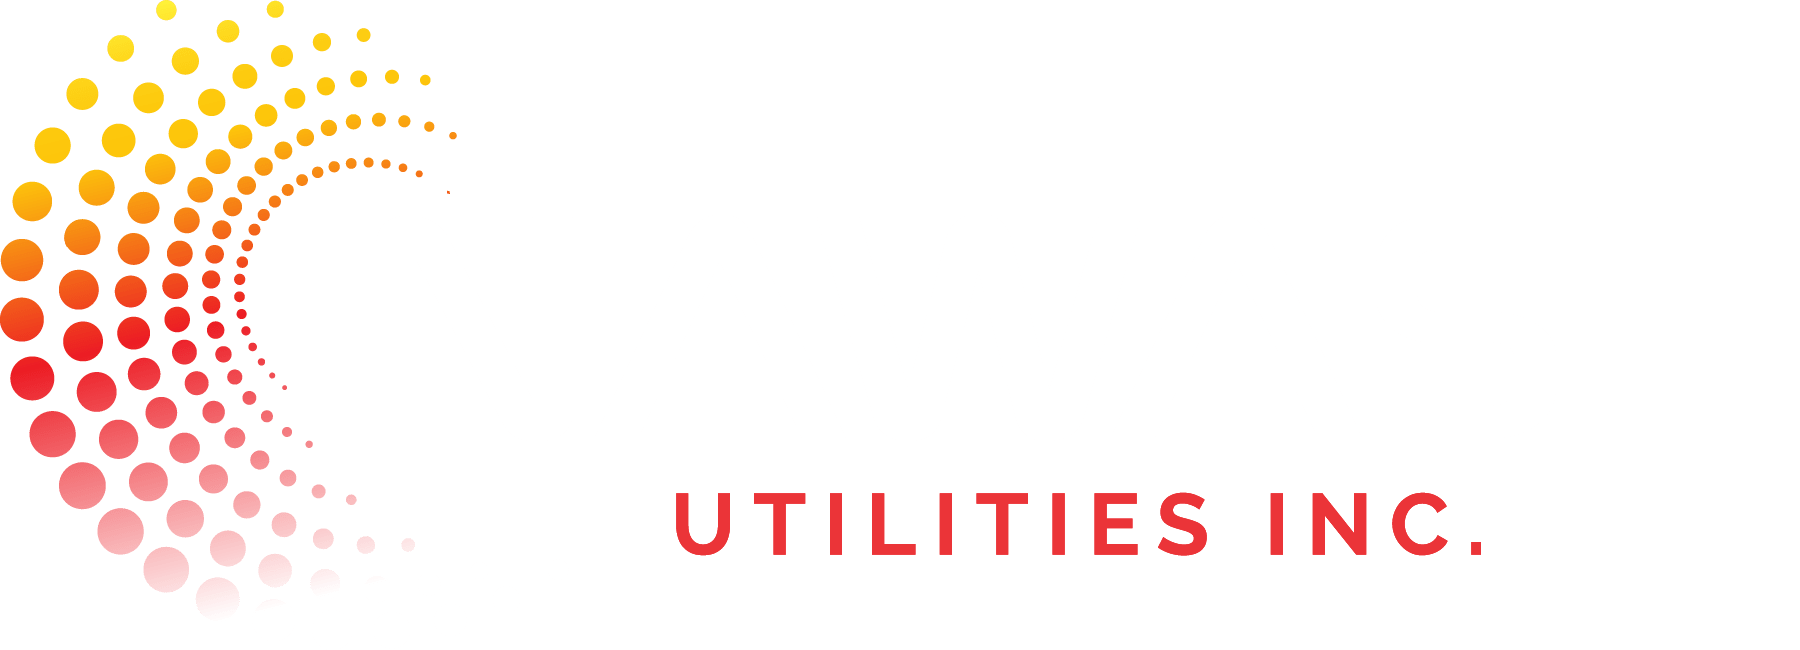 The image shows a logo with the text "NAWASH UTILITIES INC." in white with a gradient dot swirl design transitioning from yellow to red.